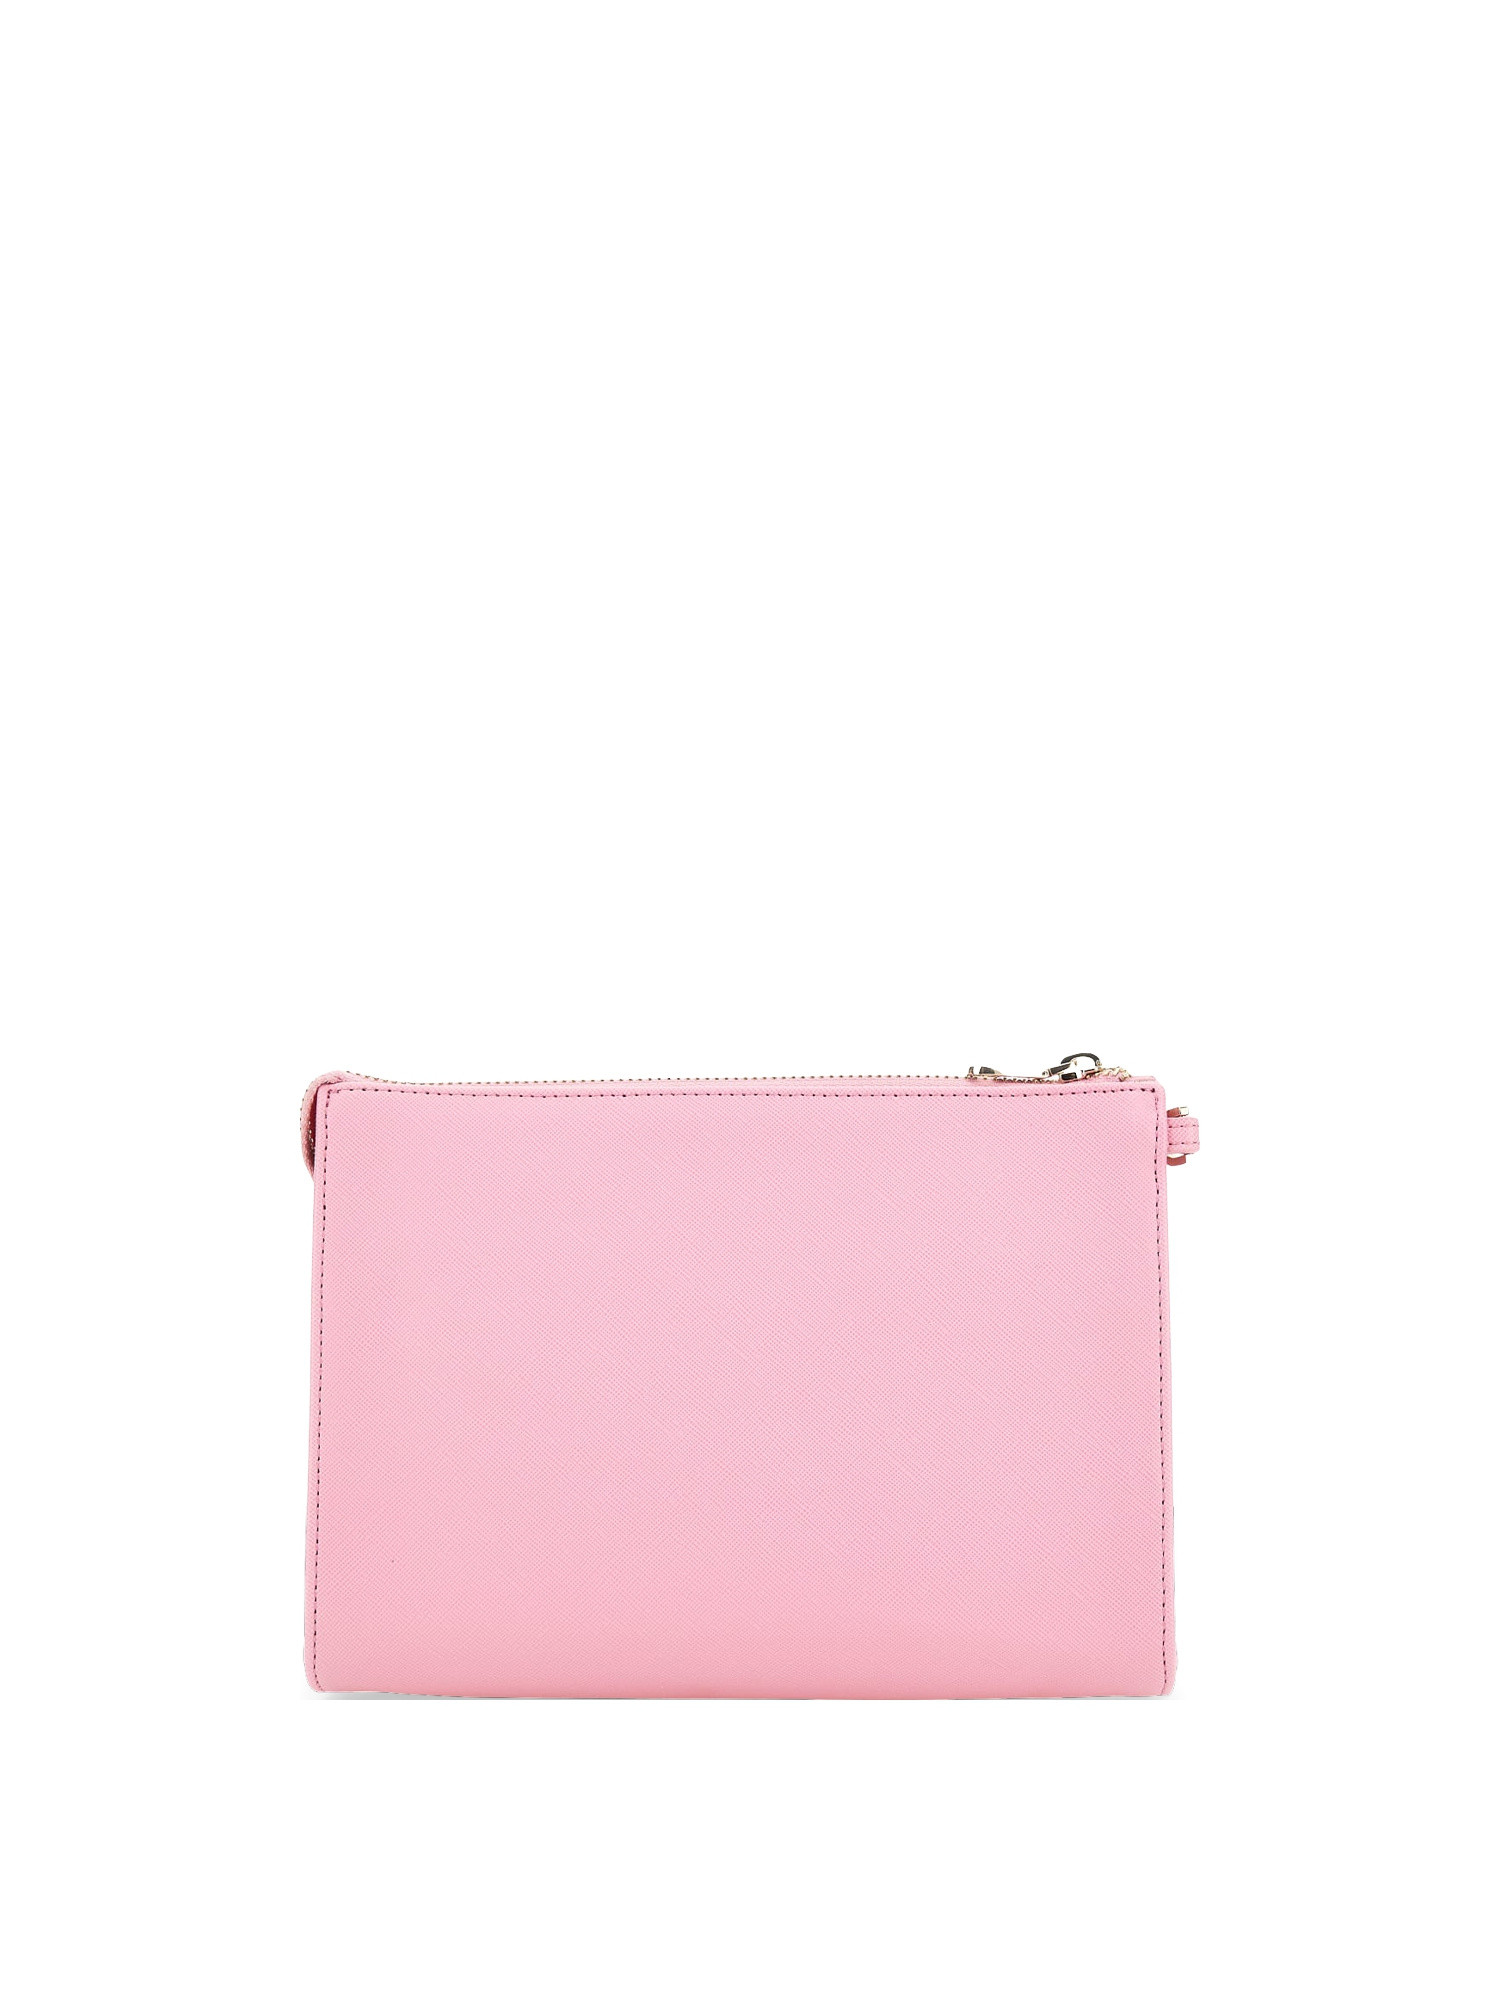 Guess - Pouch con logo, Rosa, large image number 1